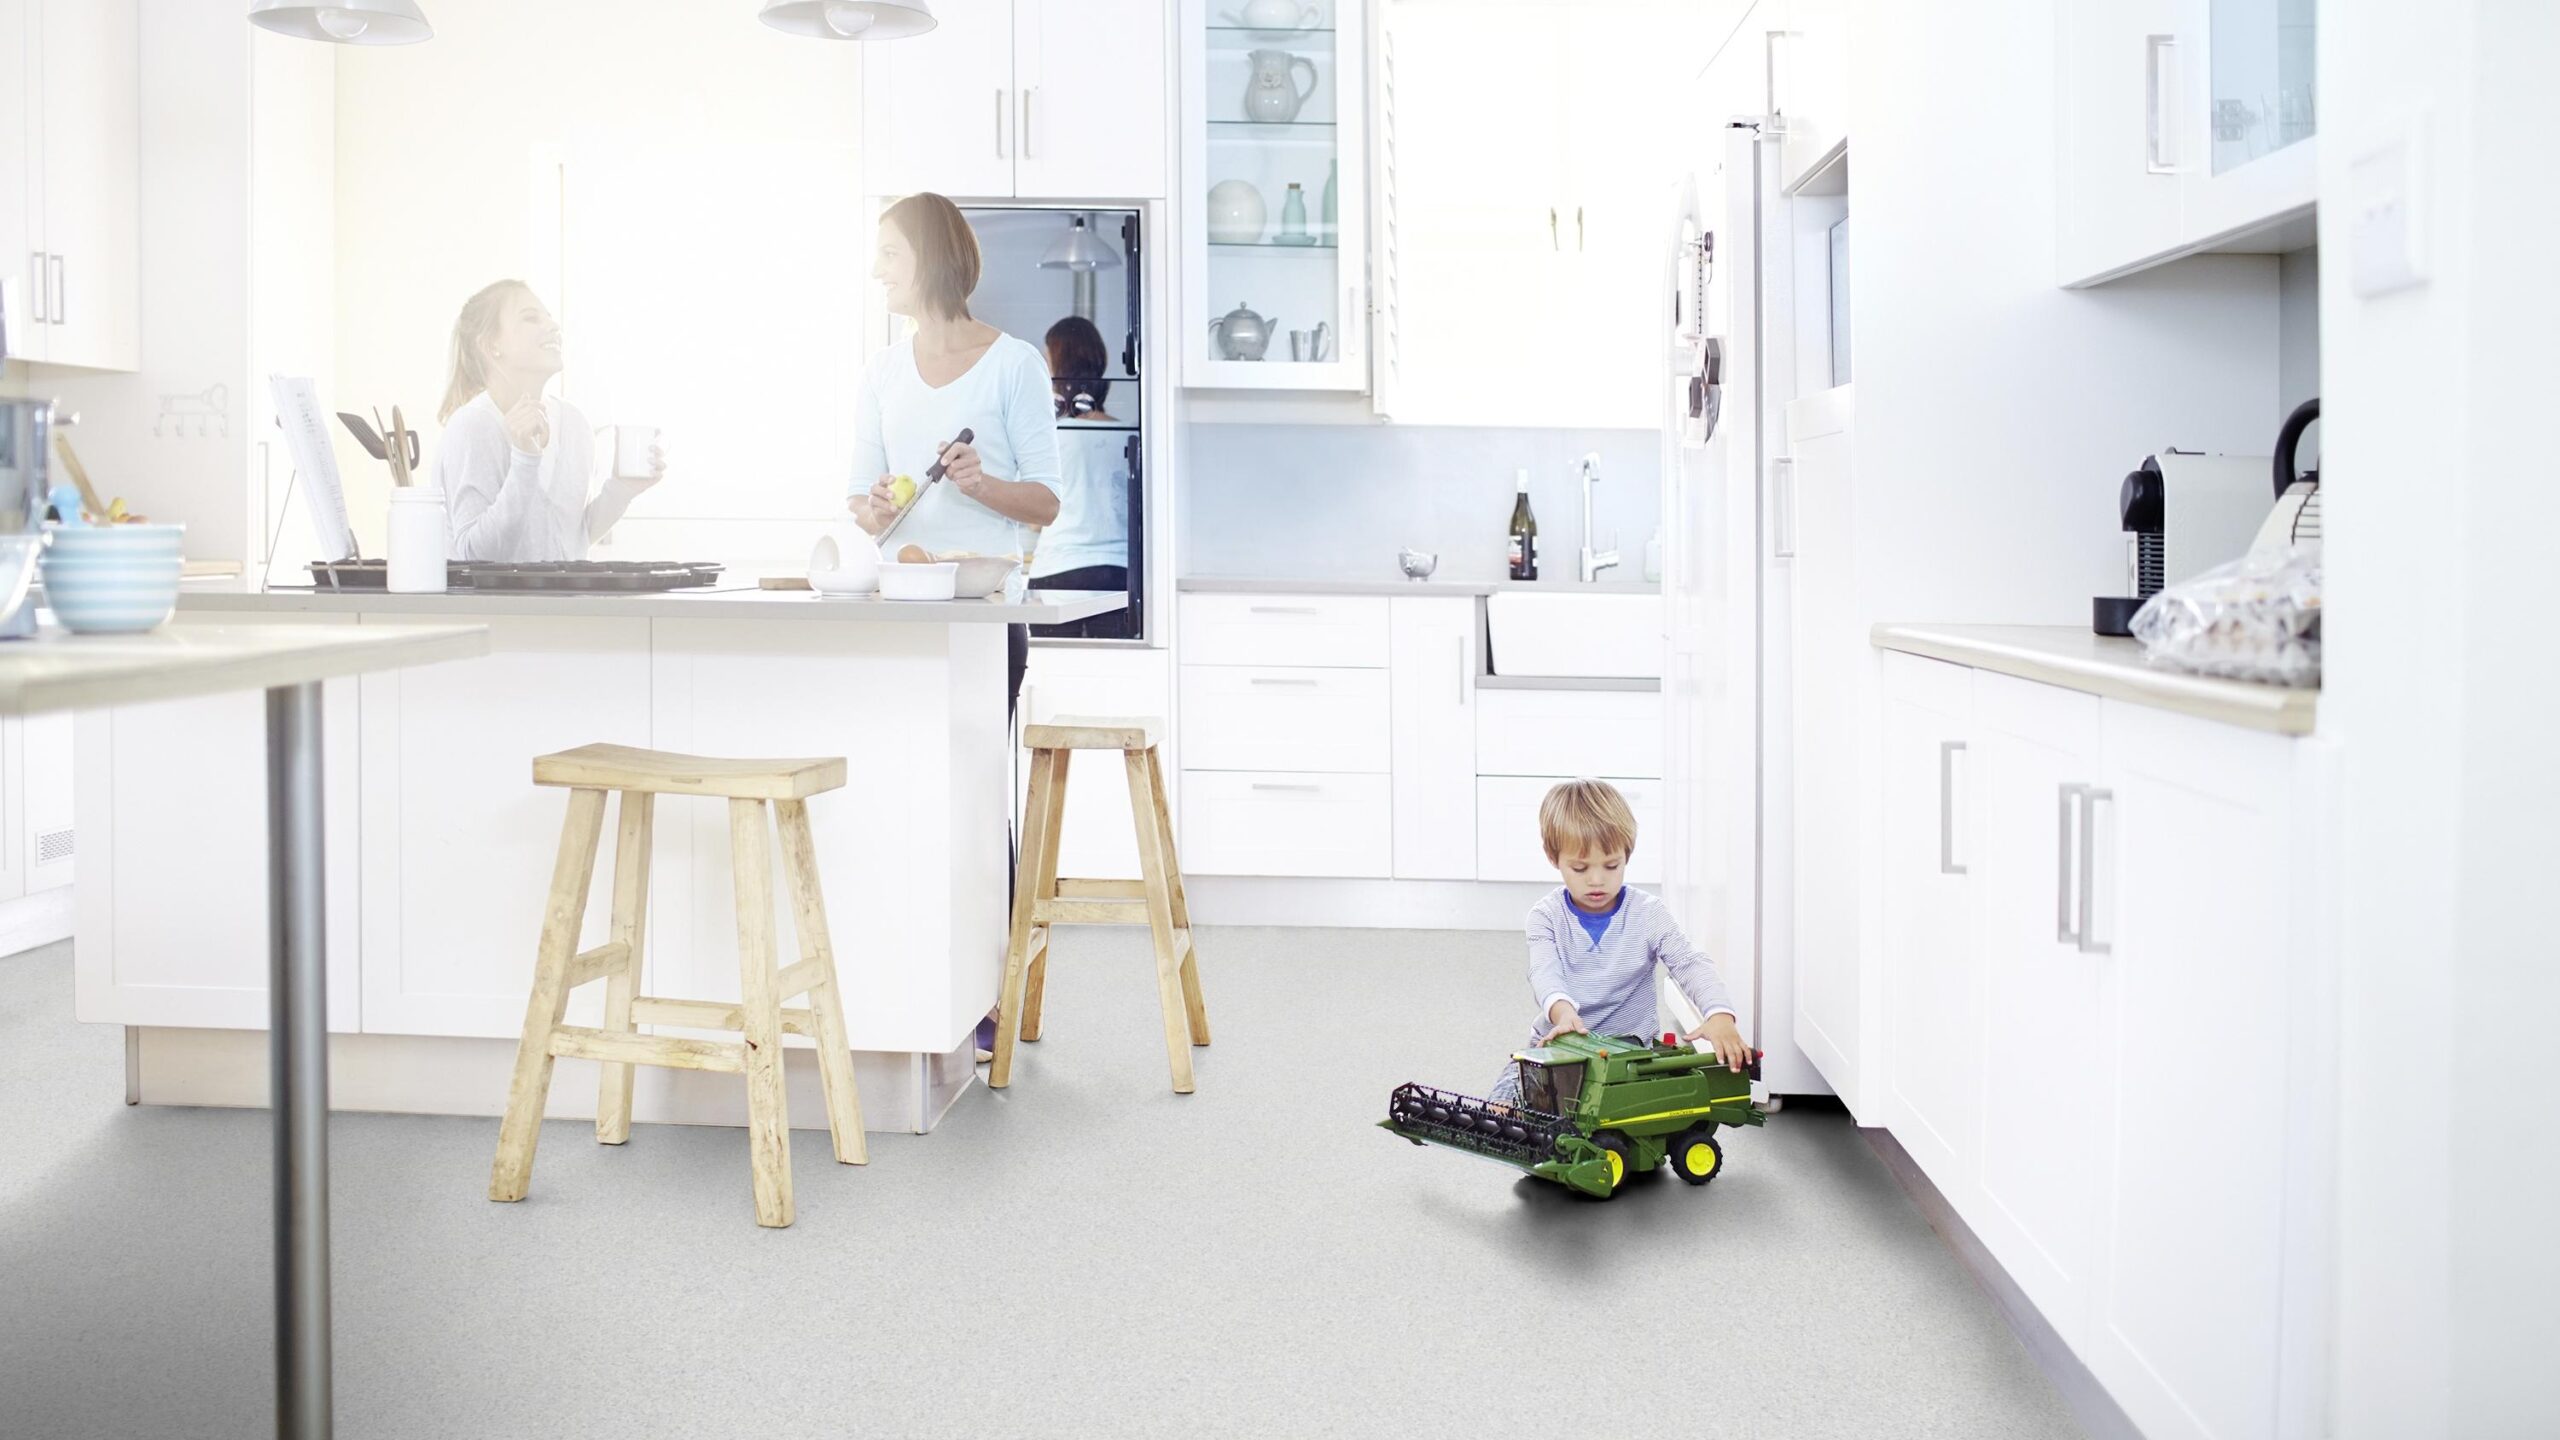 Safetread Spectrum Safety Vinyl Flooring used in a kitchen, with child playing.